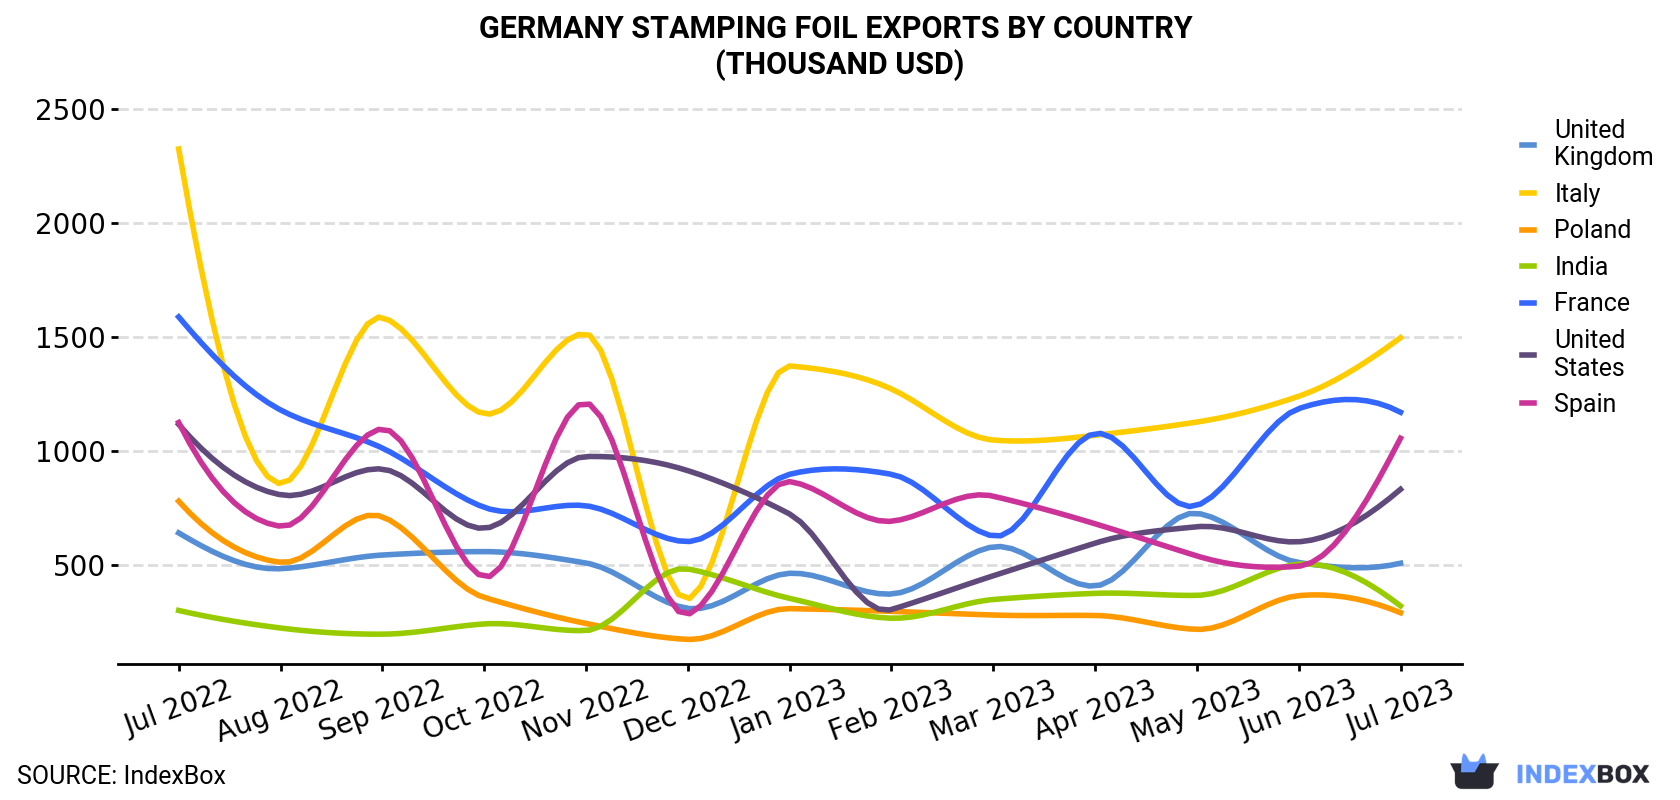 Germany Stamping Foil Exports By Country (Thousand USD)